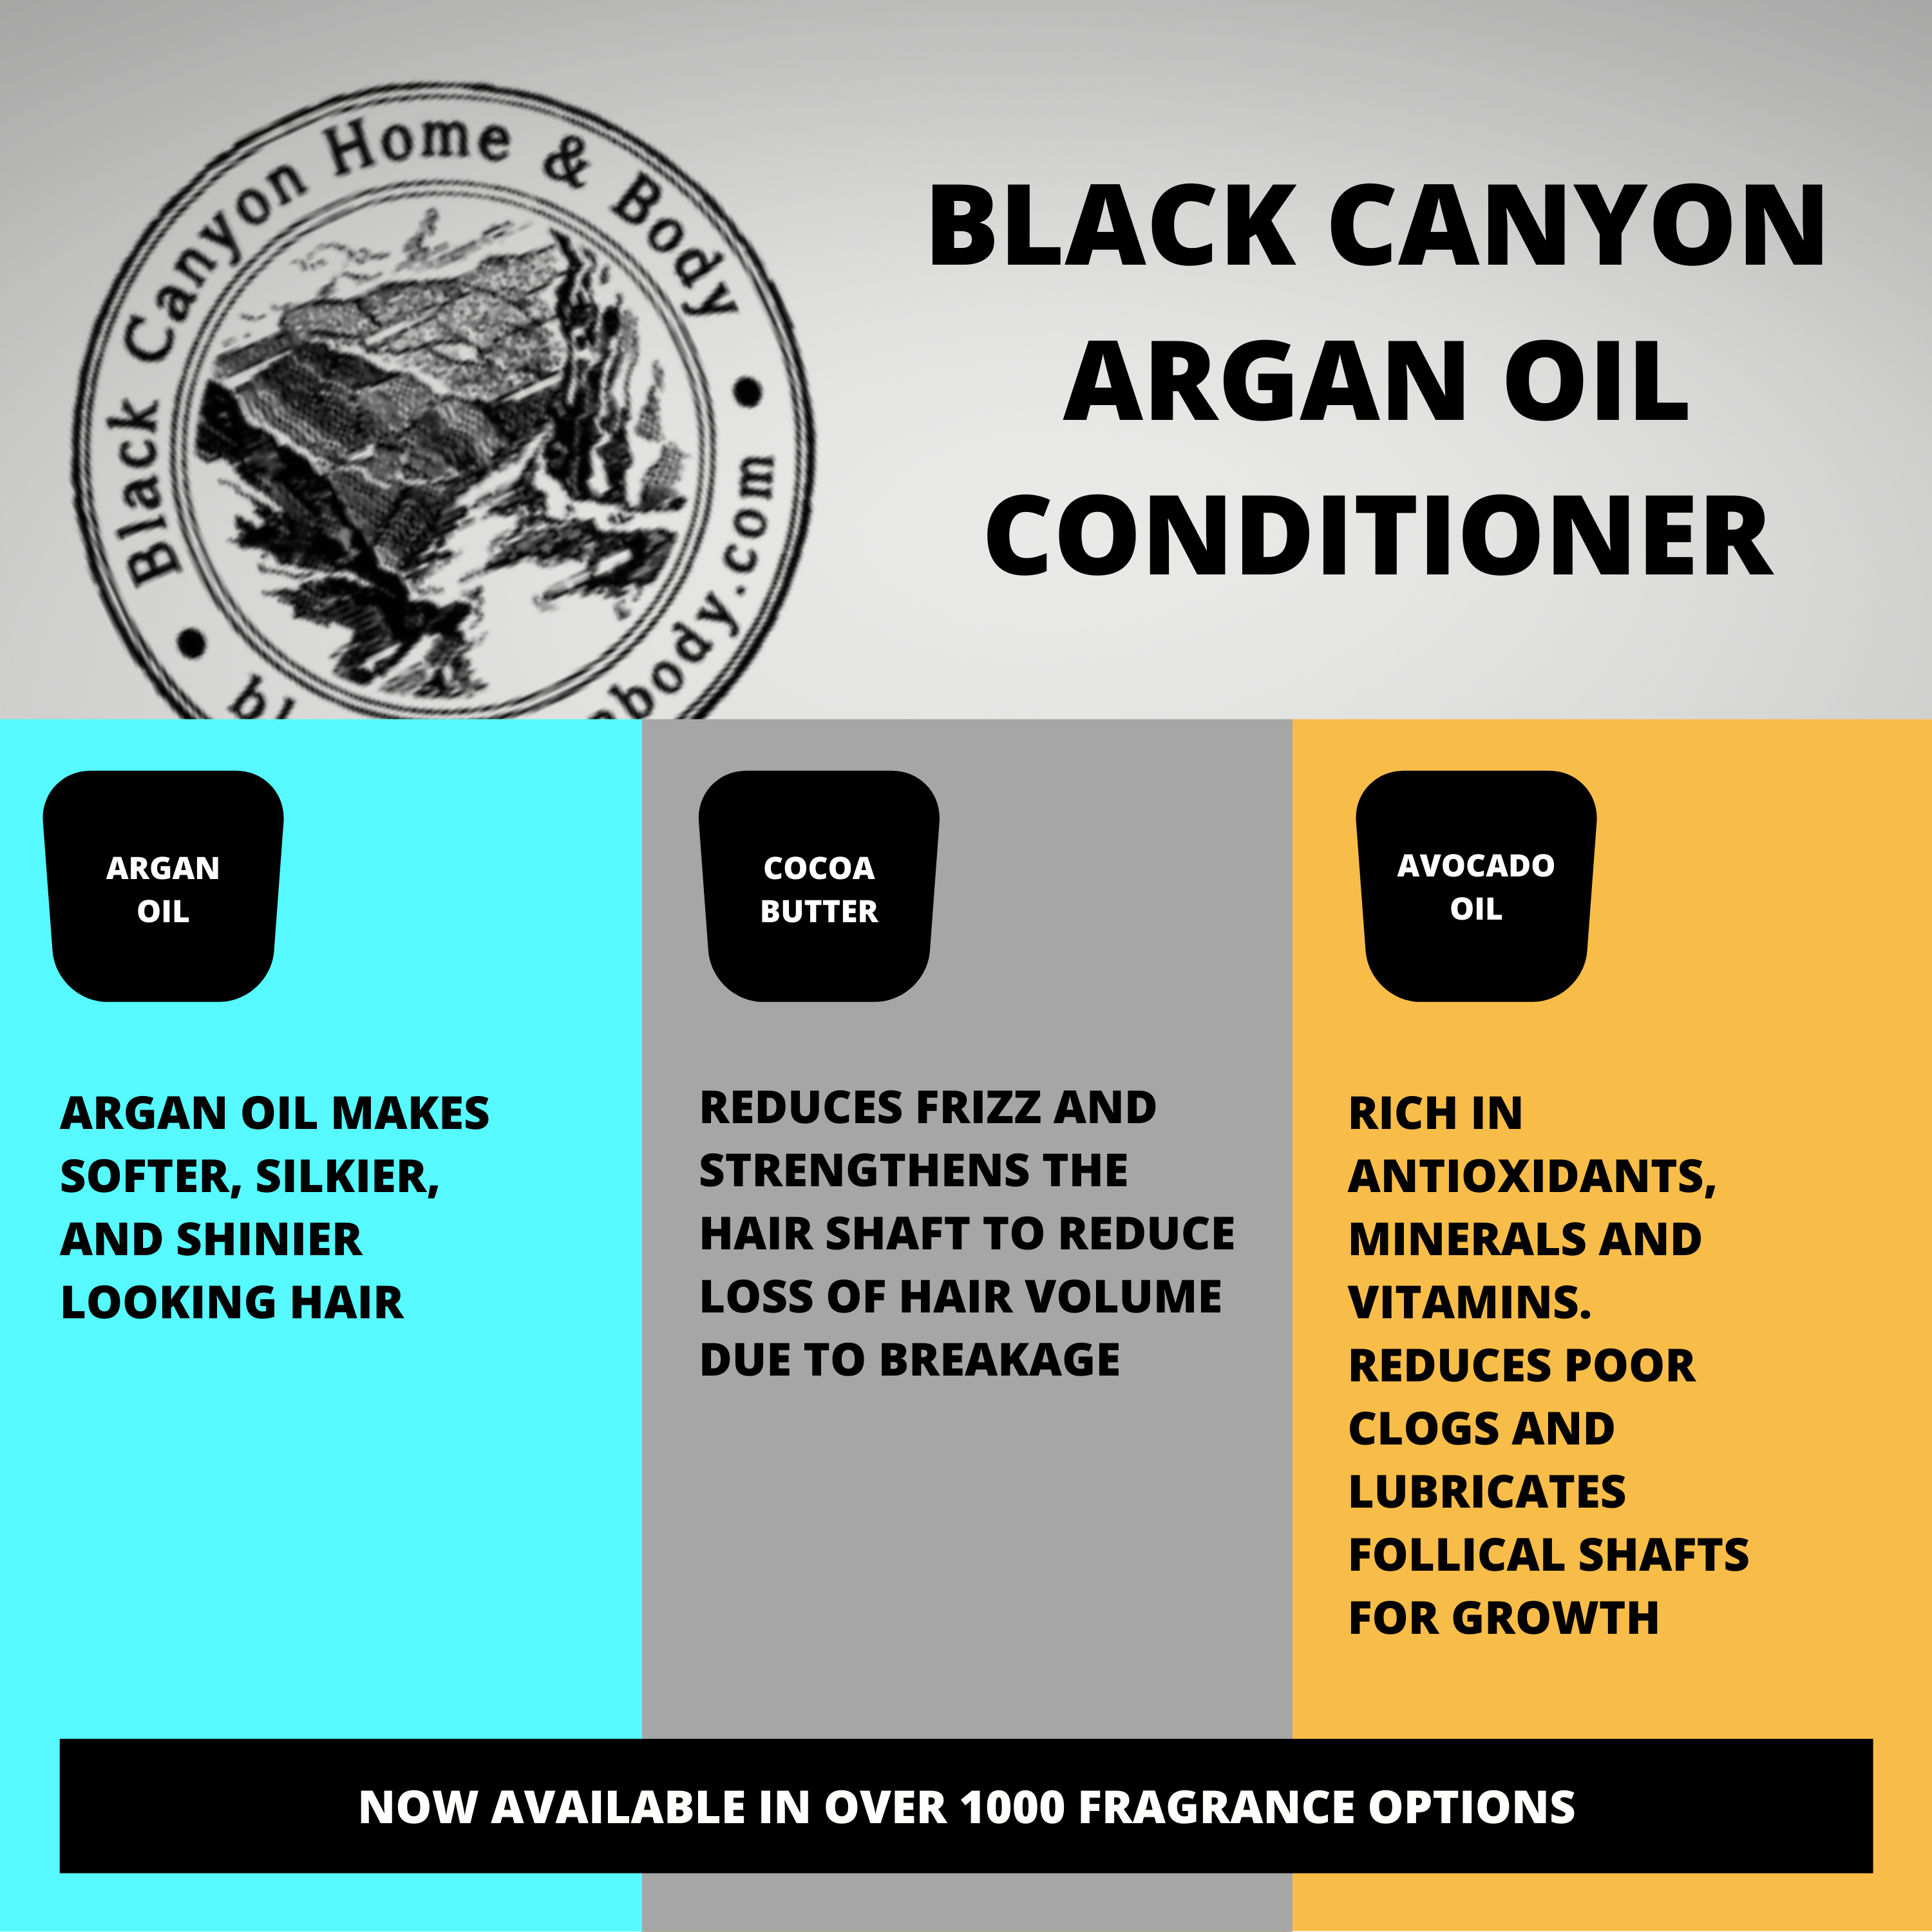 Black Canyon Banana Kiwi Scented Conditioner with Argan Oil